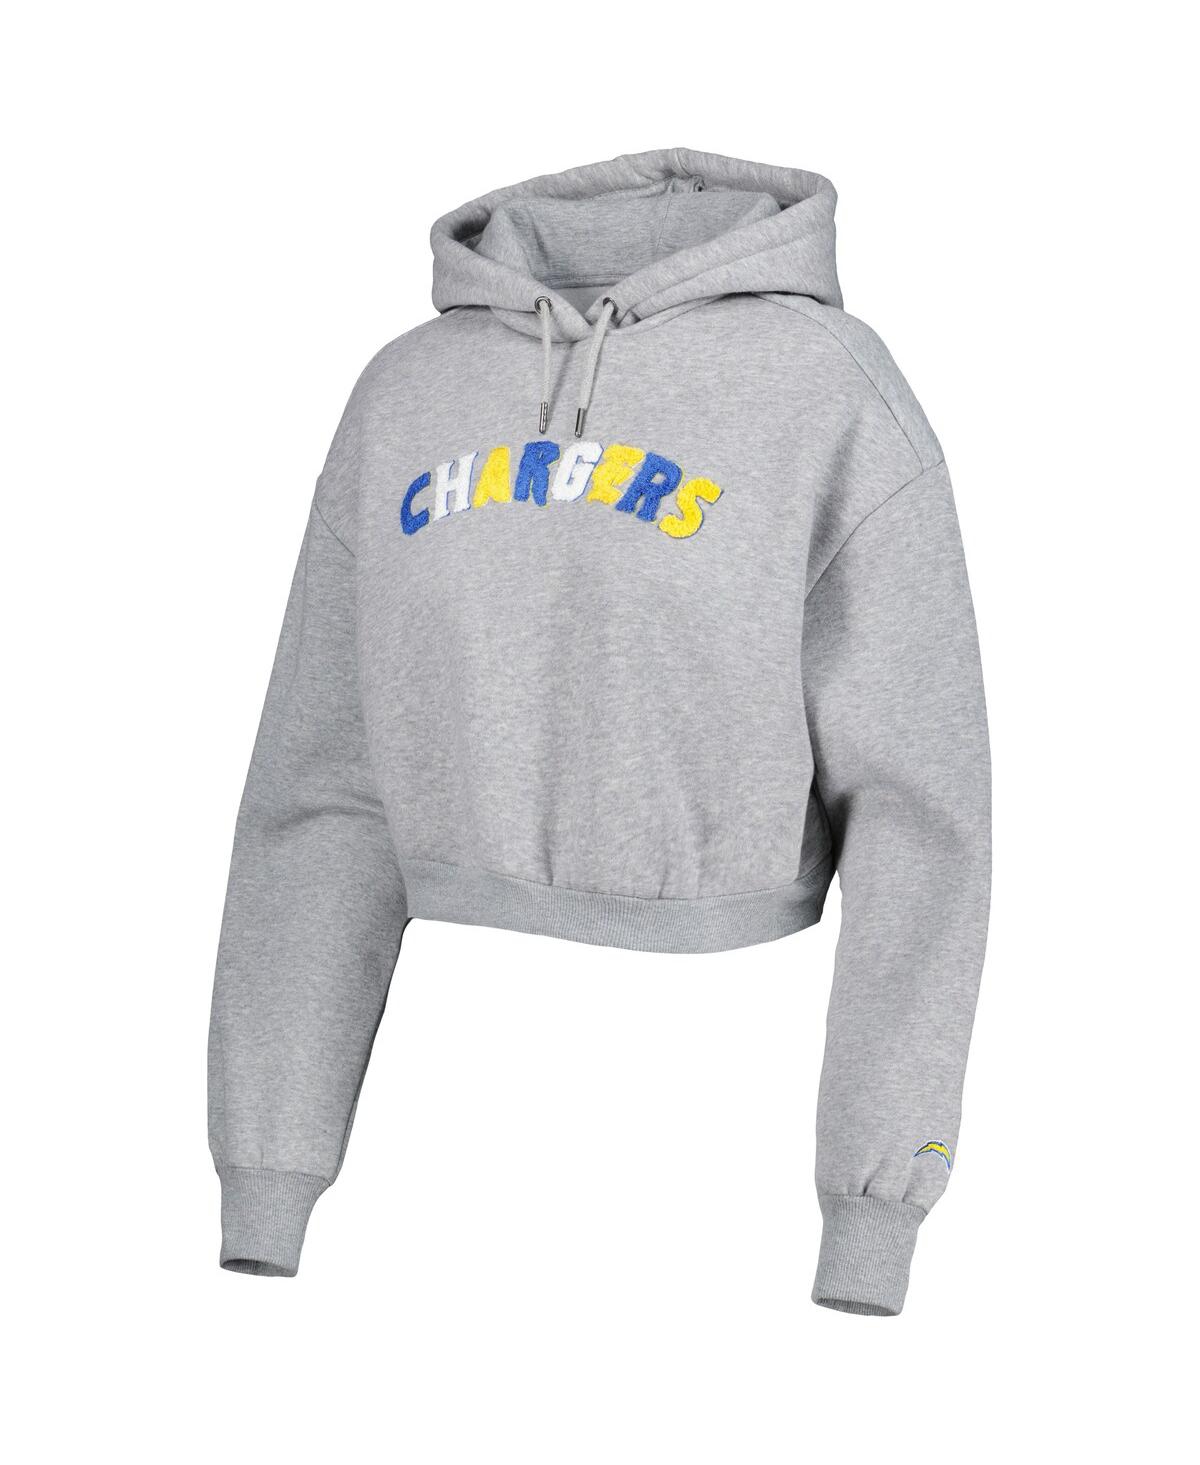 Shop The Wild Collective Women's  Gray Los Angeles Chargers Cropped Pullover Hoodie